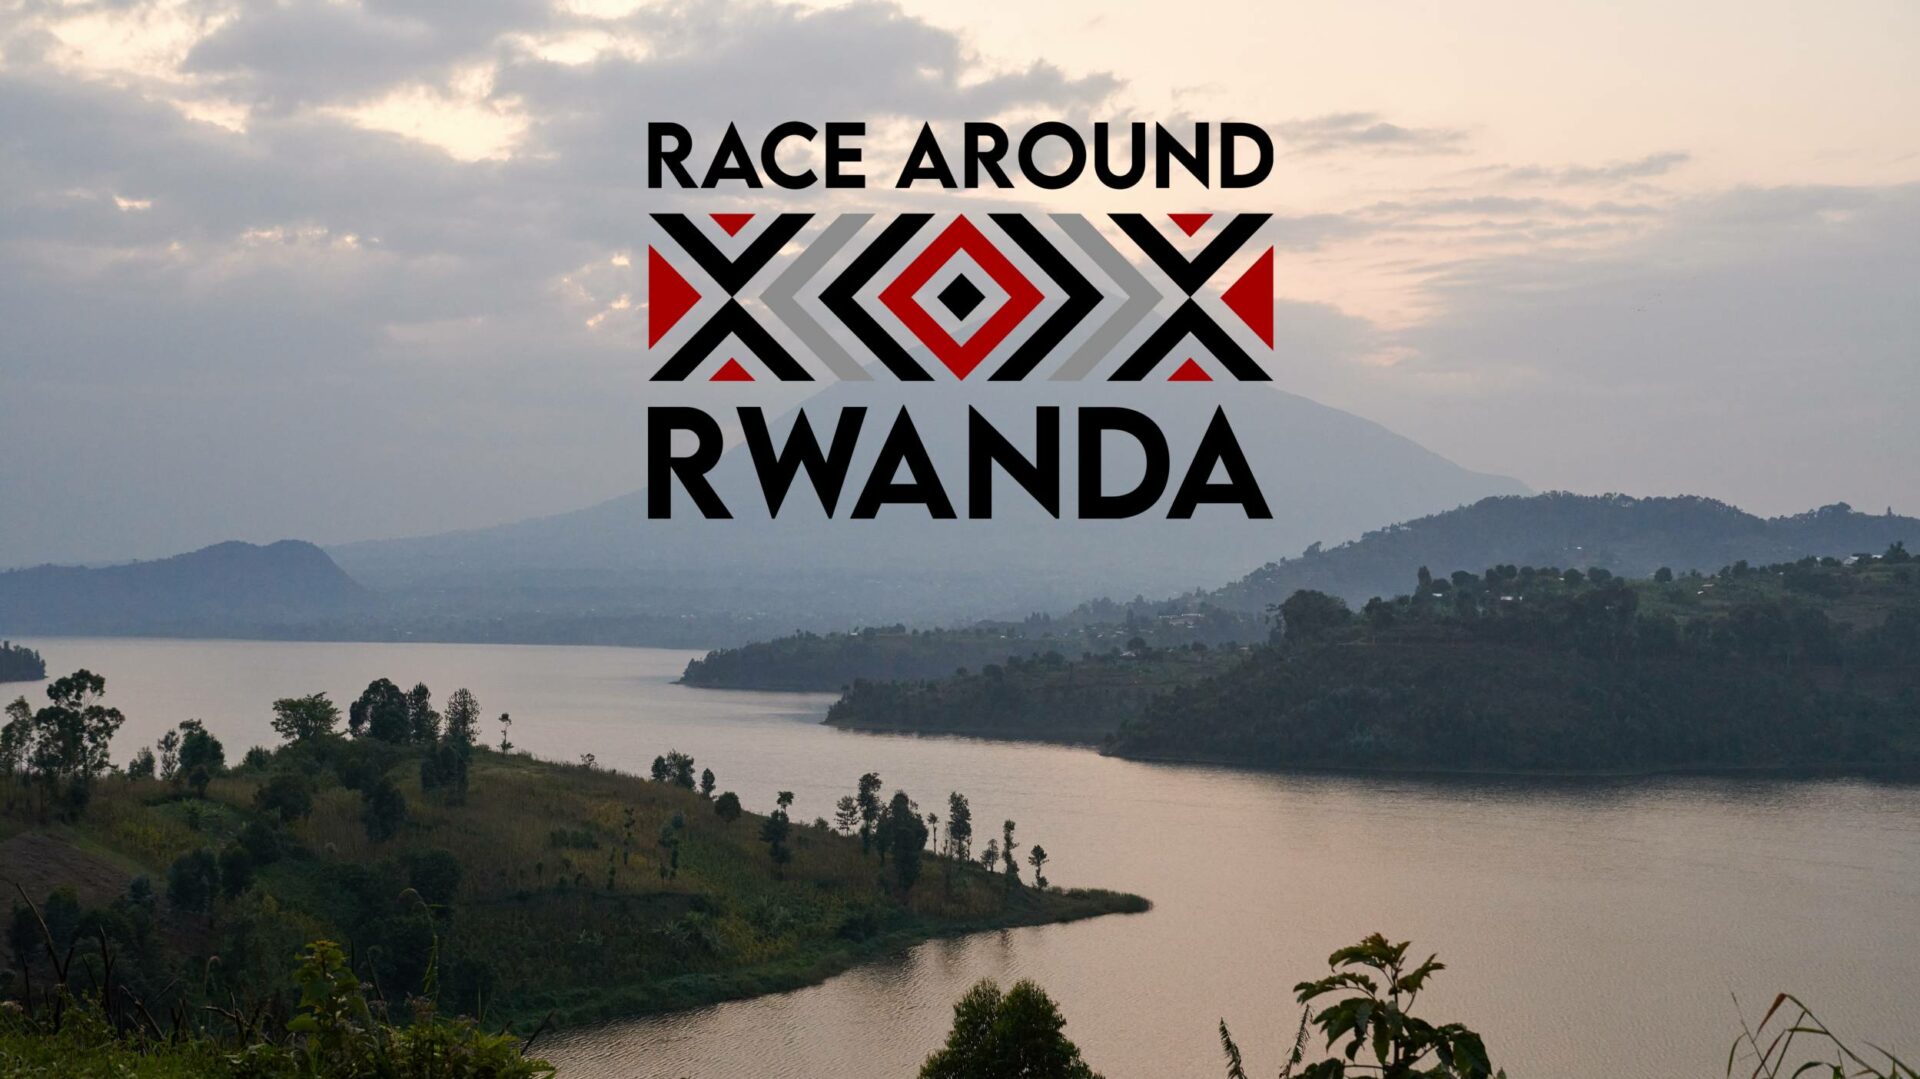 I am not free on the dates of the race, but want to ride in Rwanda